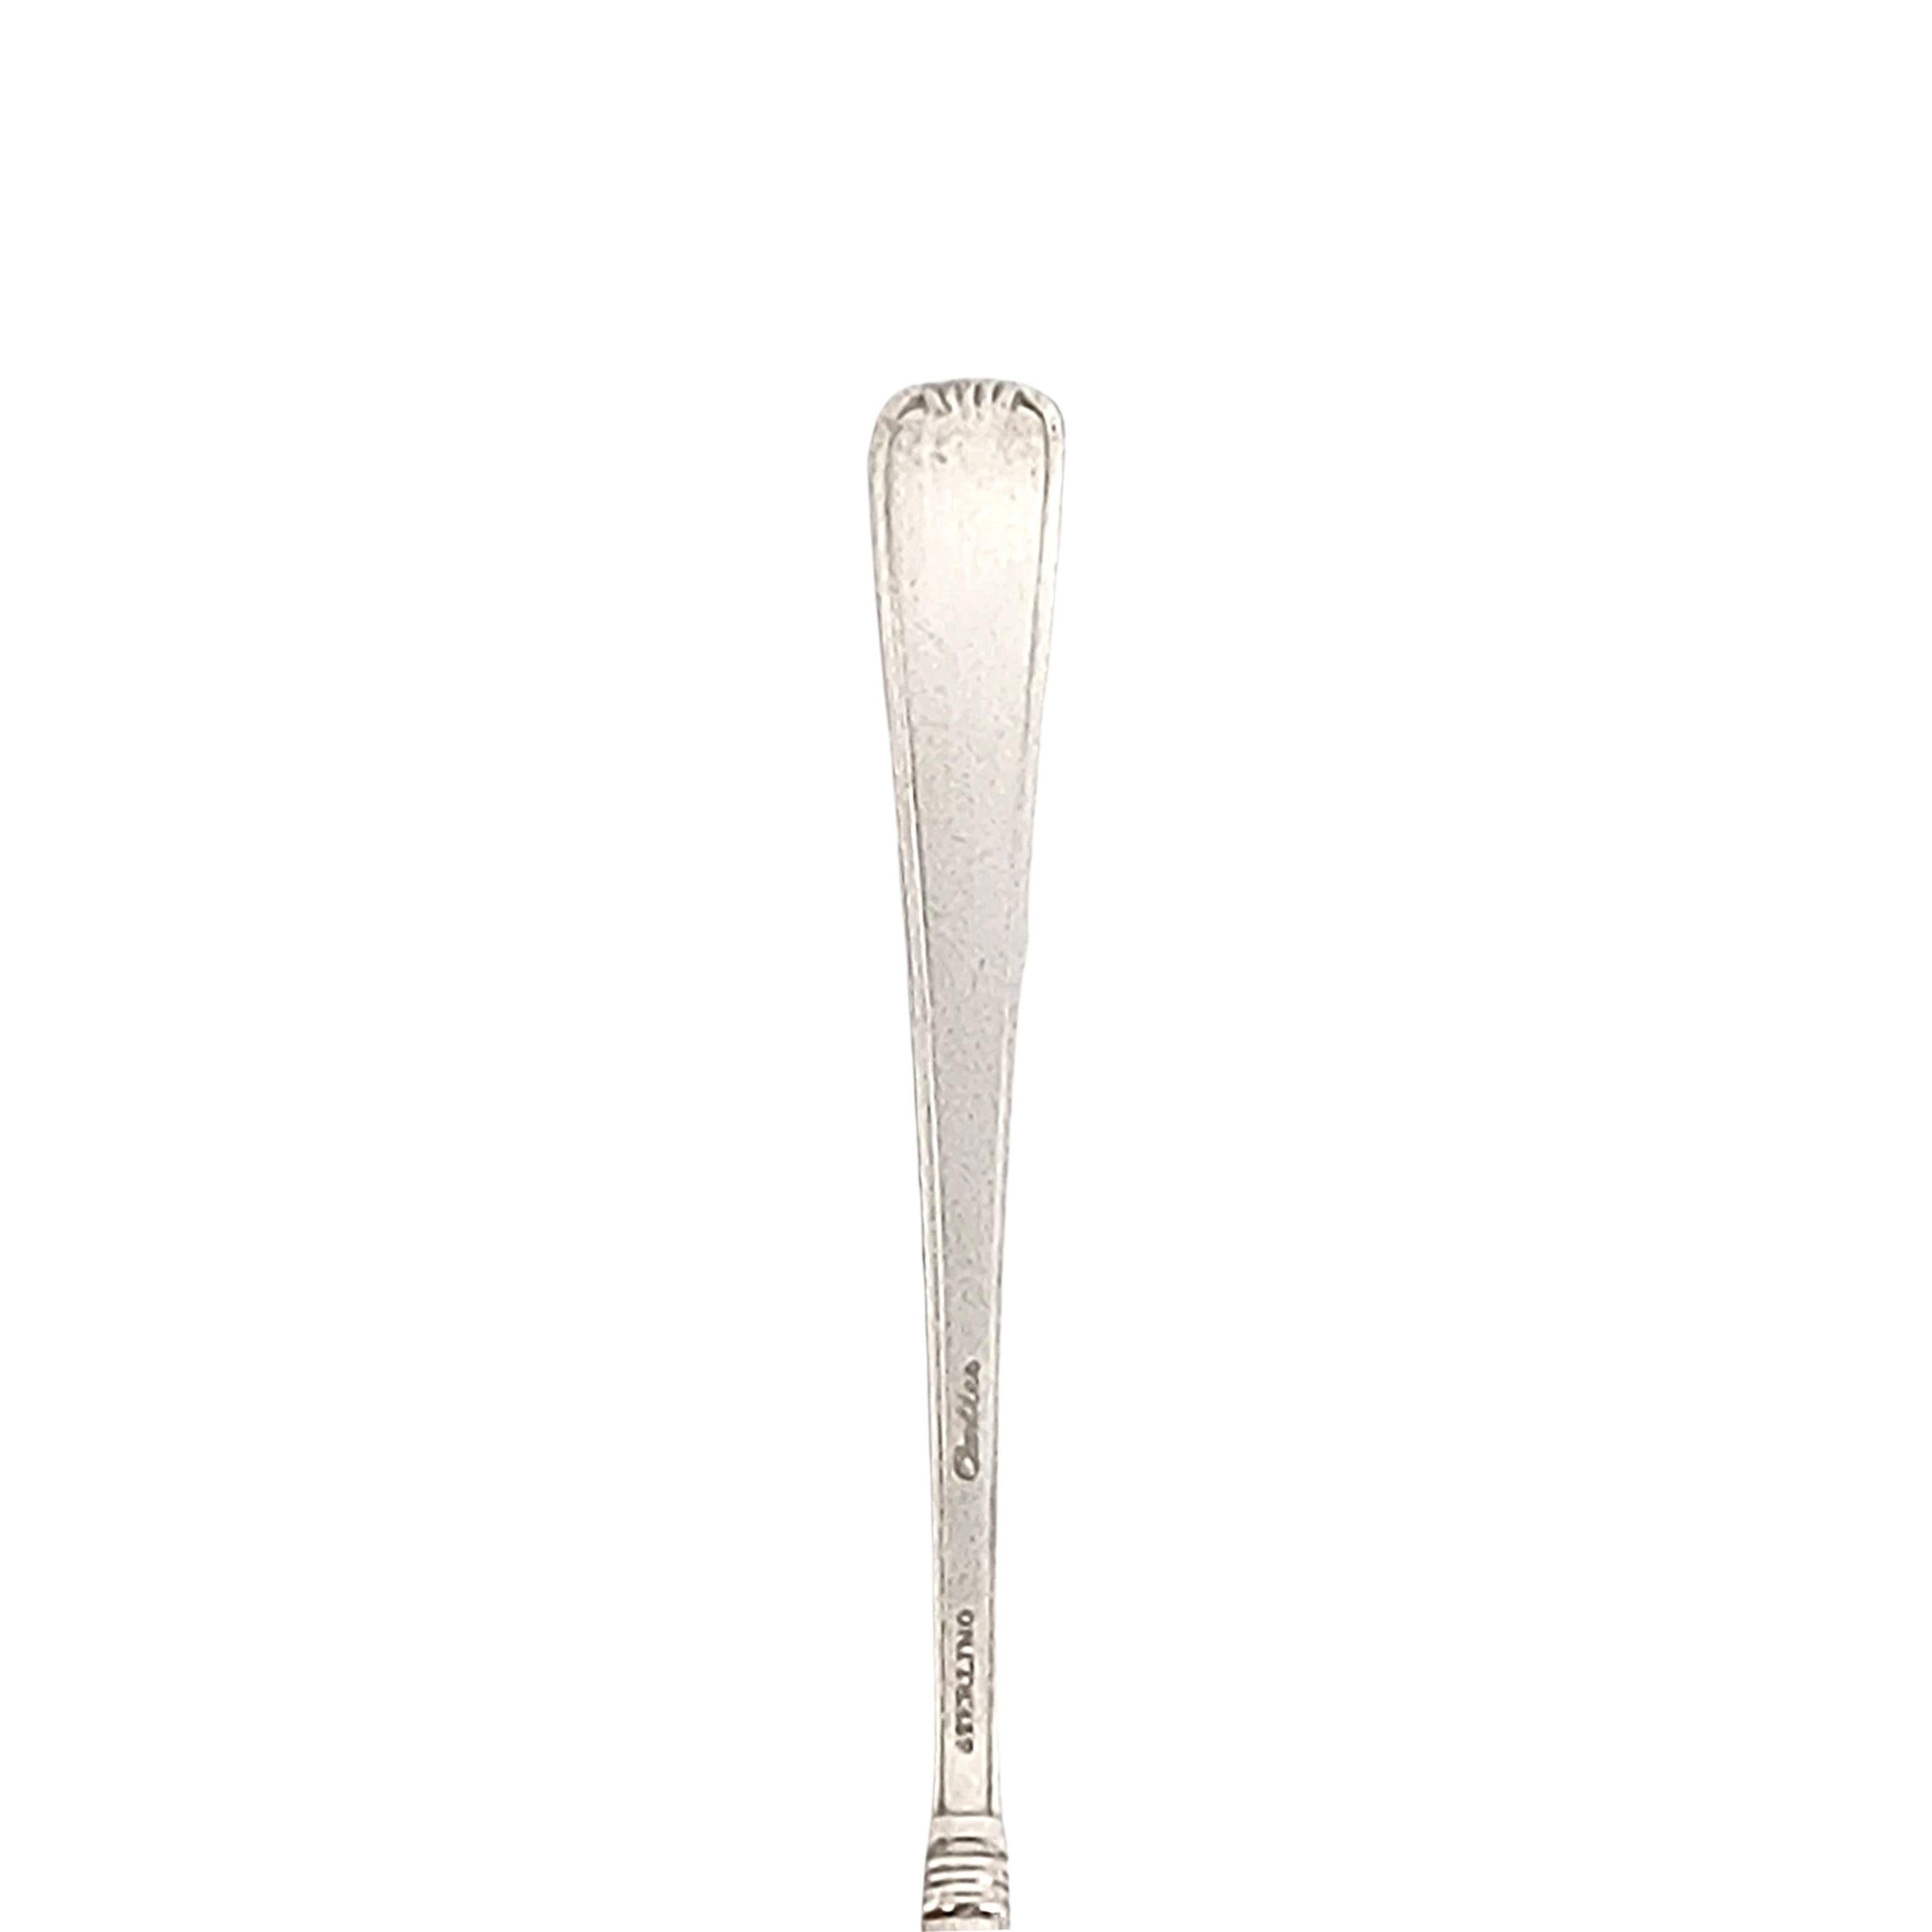 Set of 5 Cartier Sterling Marie Louise Ice Cream Forks with Monogram #14892 1